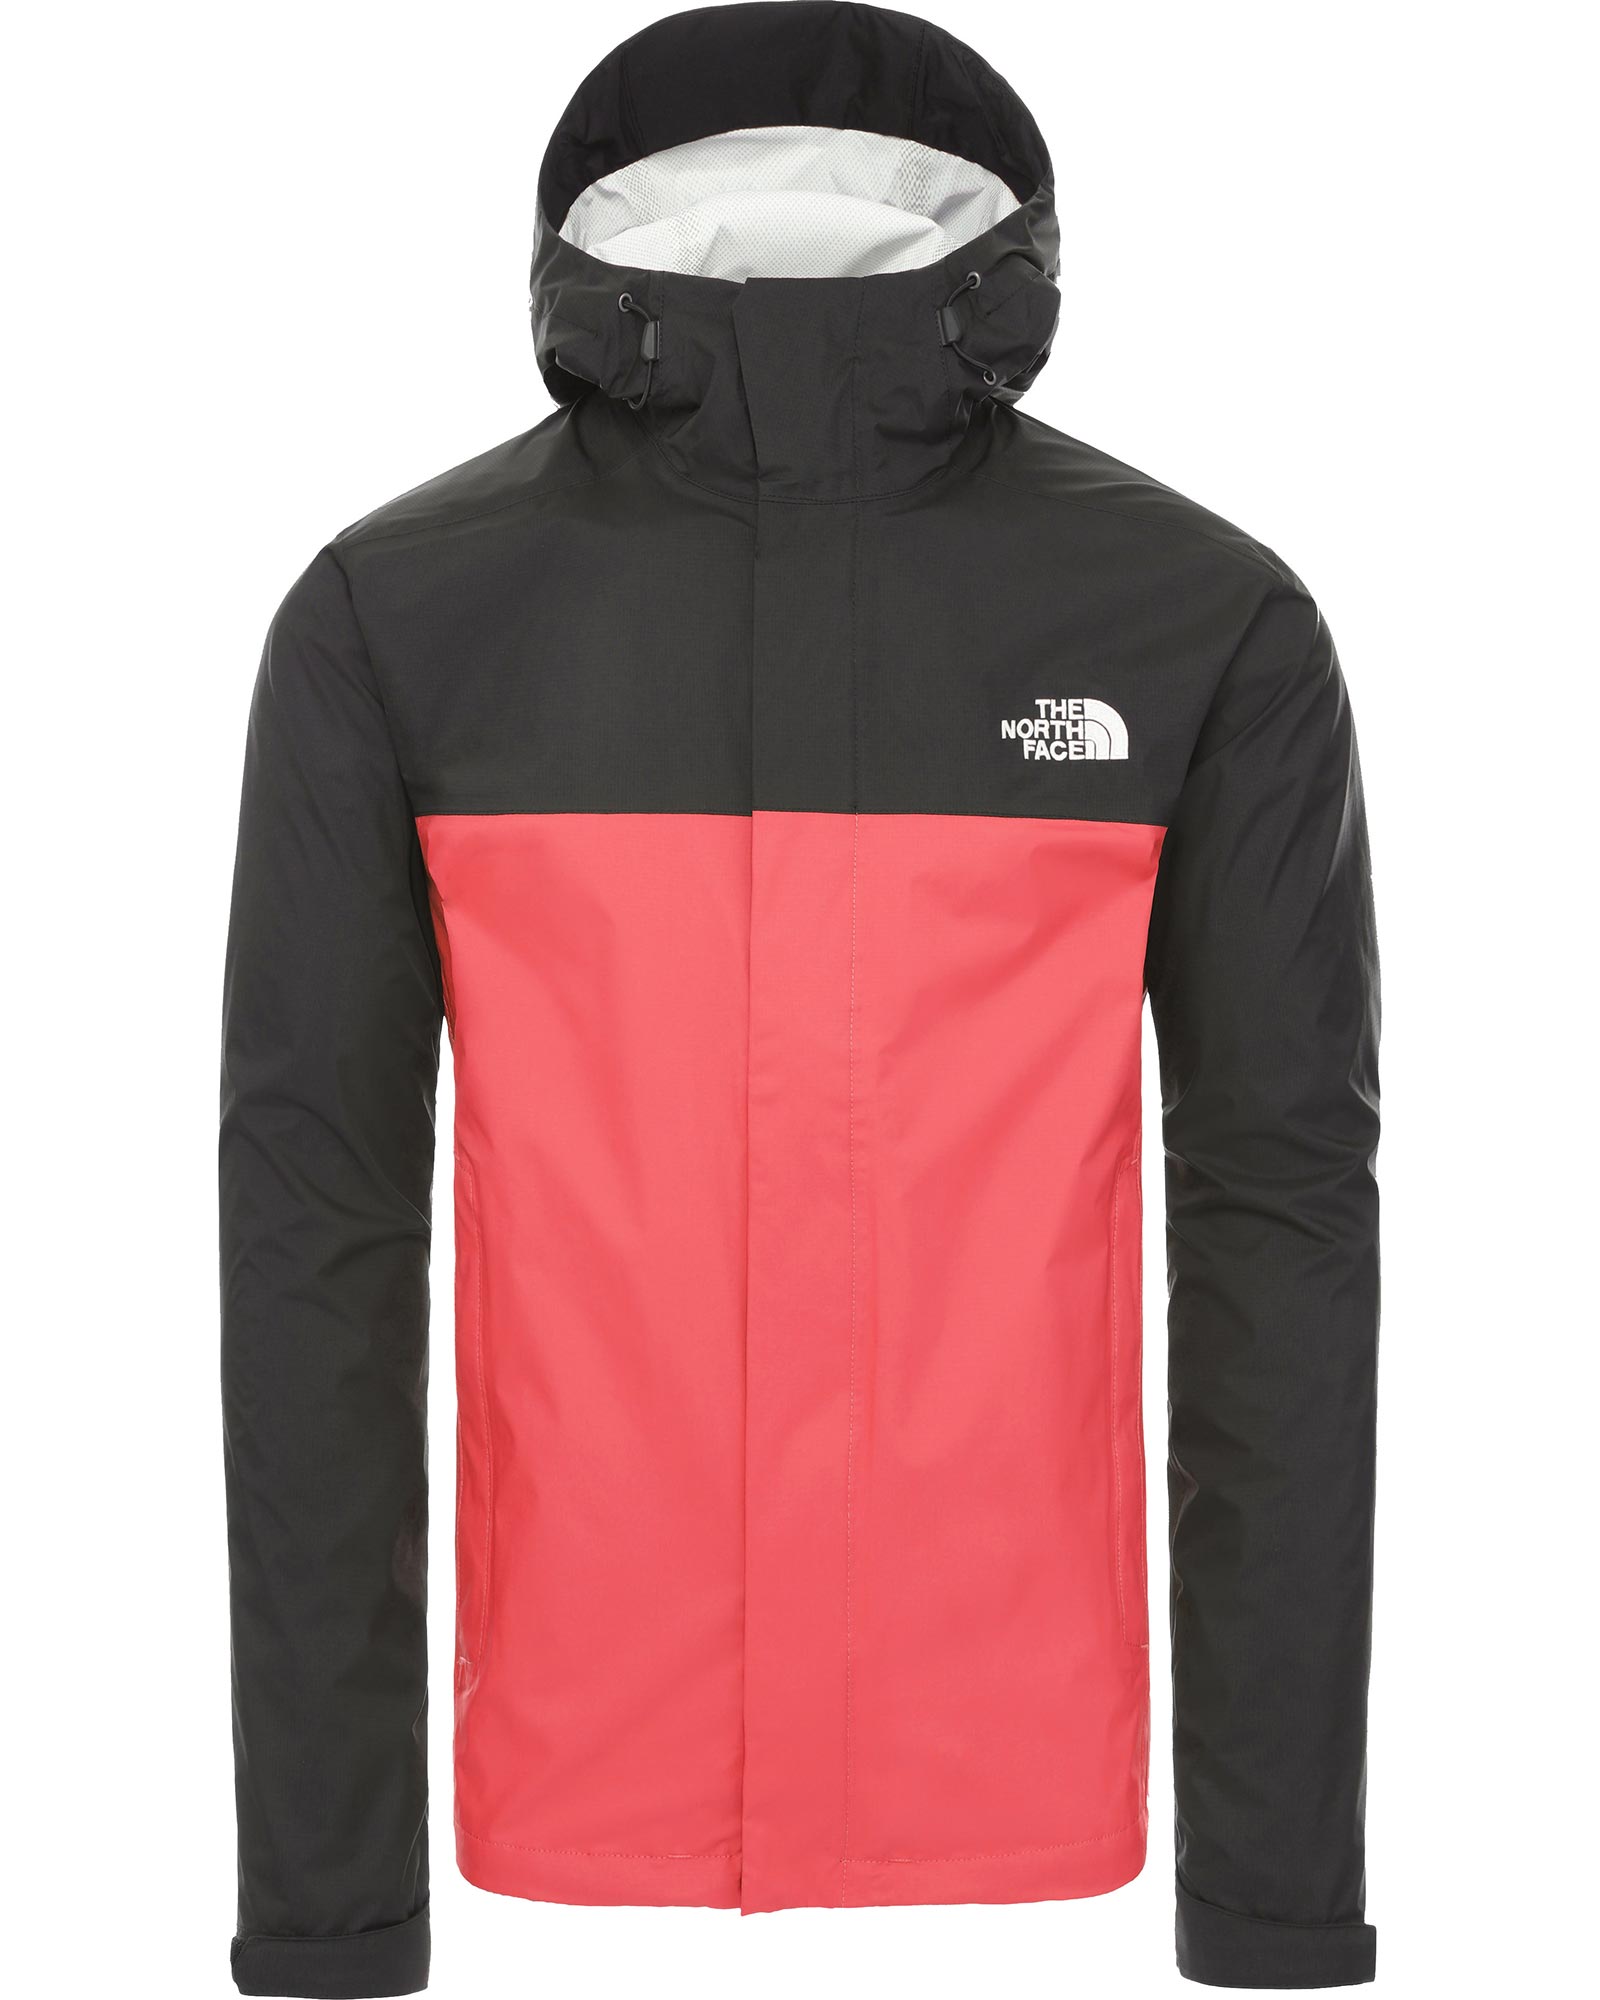 The North Face Venture Men’s Jacket - Fiery Red XL